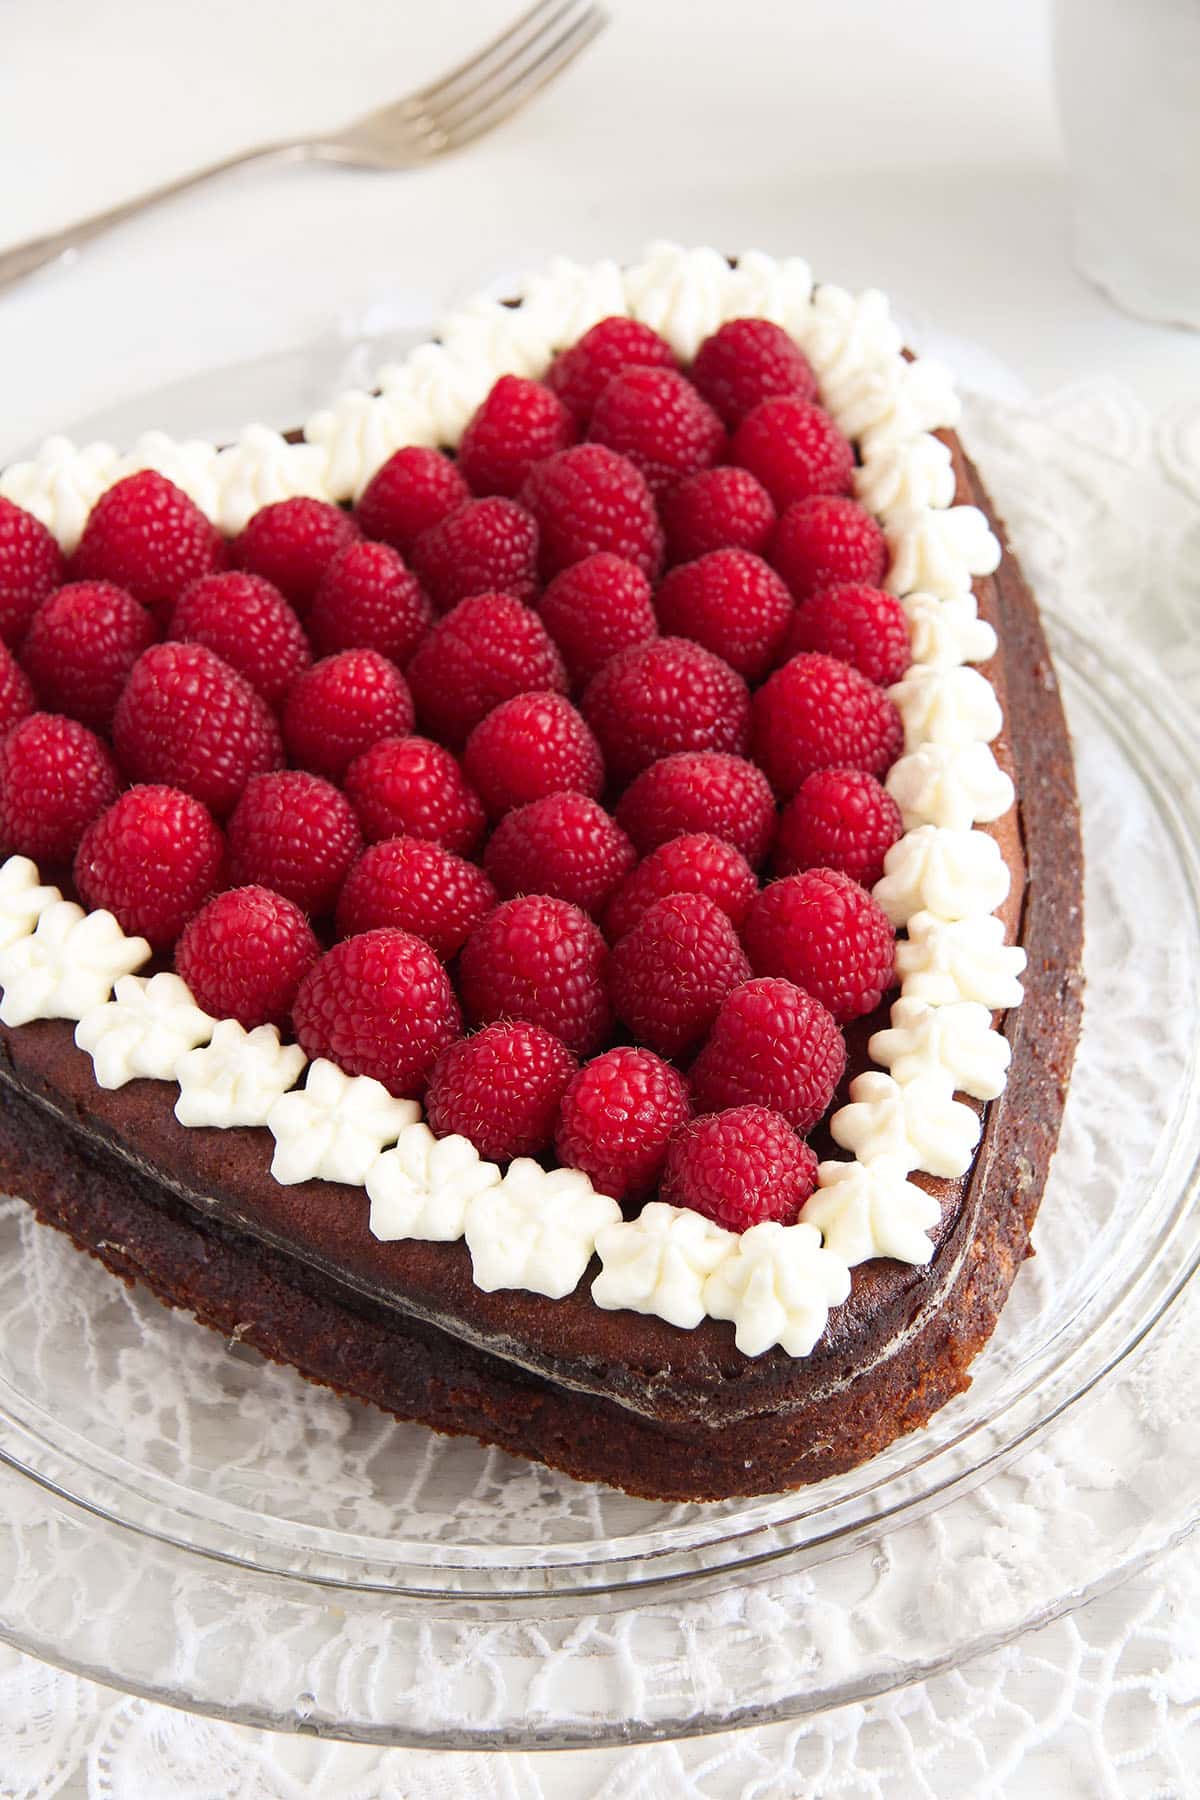 cheesecake in the shape of a heart with fresh raspberries and whipped cream on top.